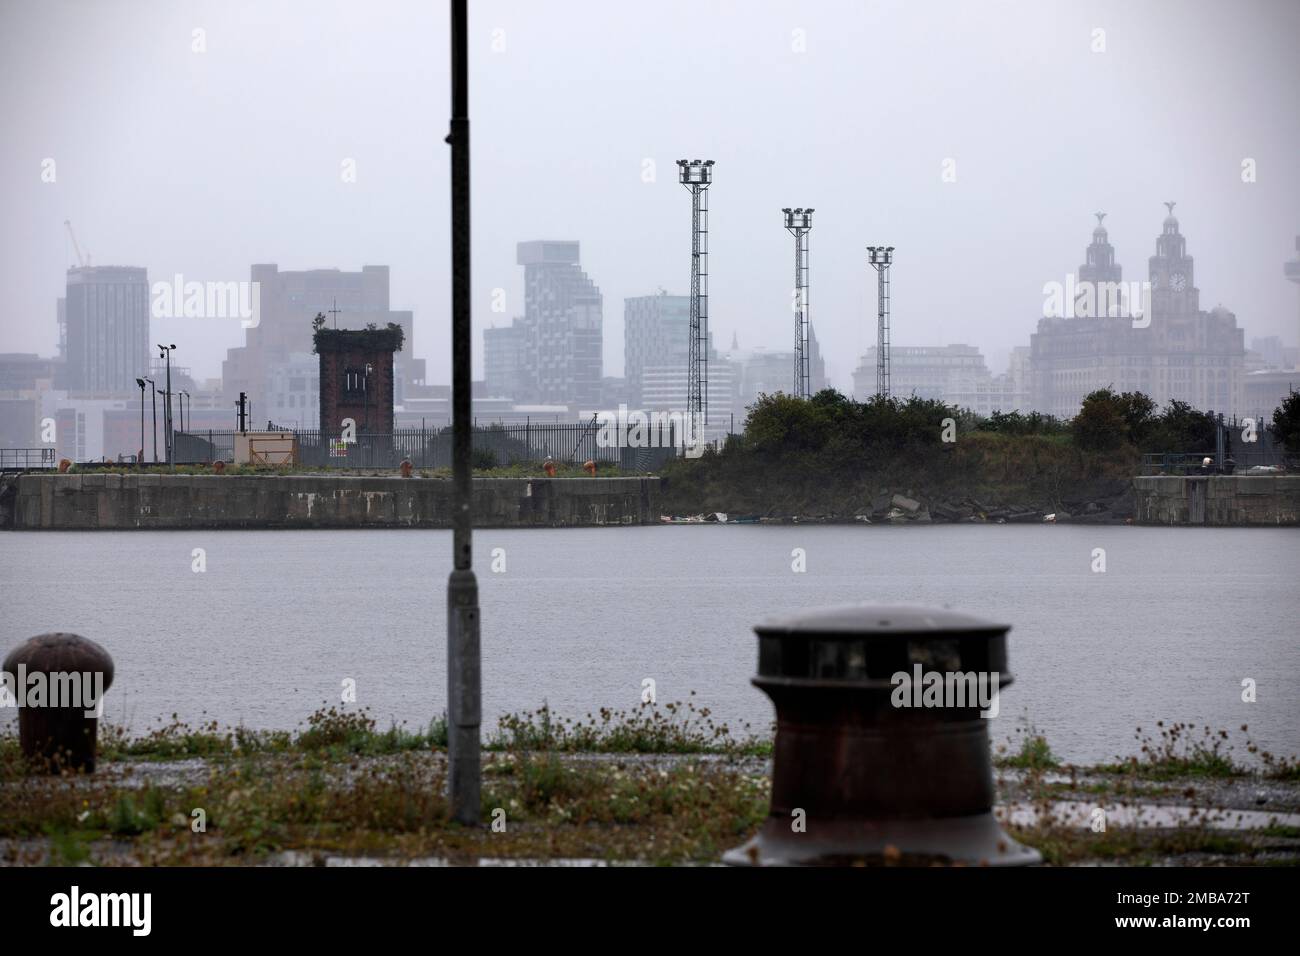 Looking across the East Float dock in Birkenhead, part of the Wirral Waters development, towards the Liver Building across the river Mersey in Liverpool. Wirral Waters will form part of the Liverpool City Region Freeport, which was announced recently by the Conservative government. Stock Photo